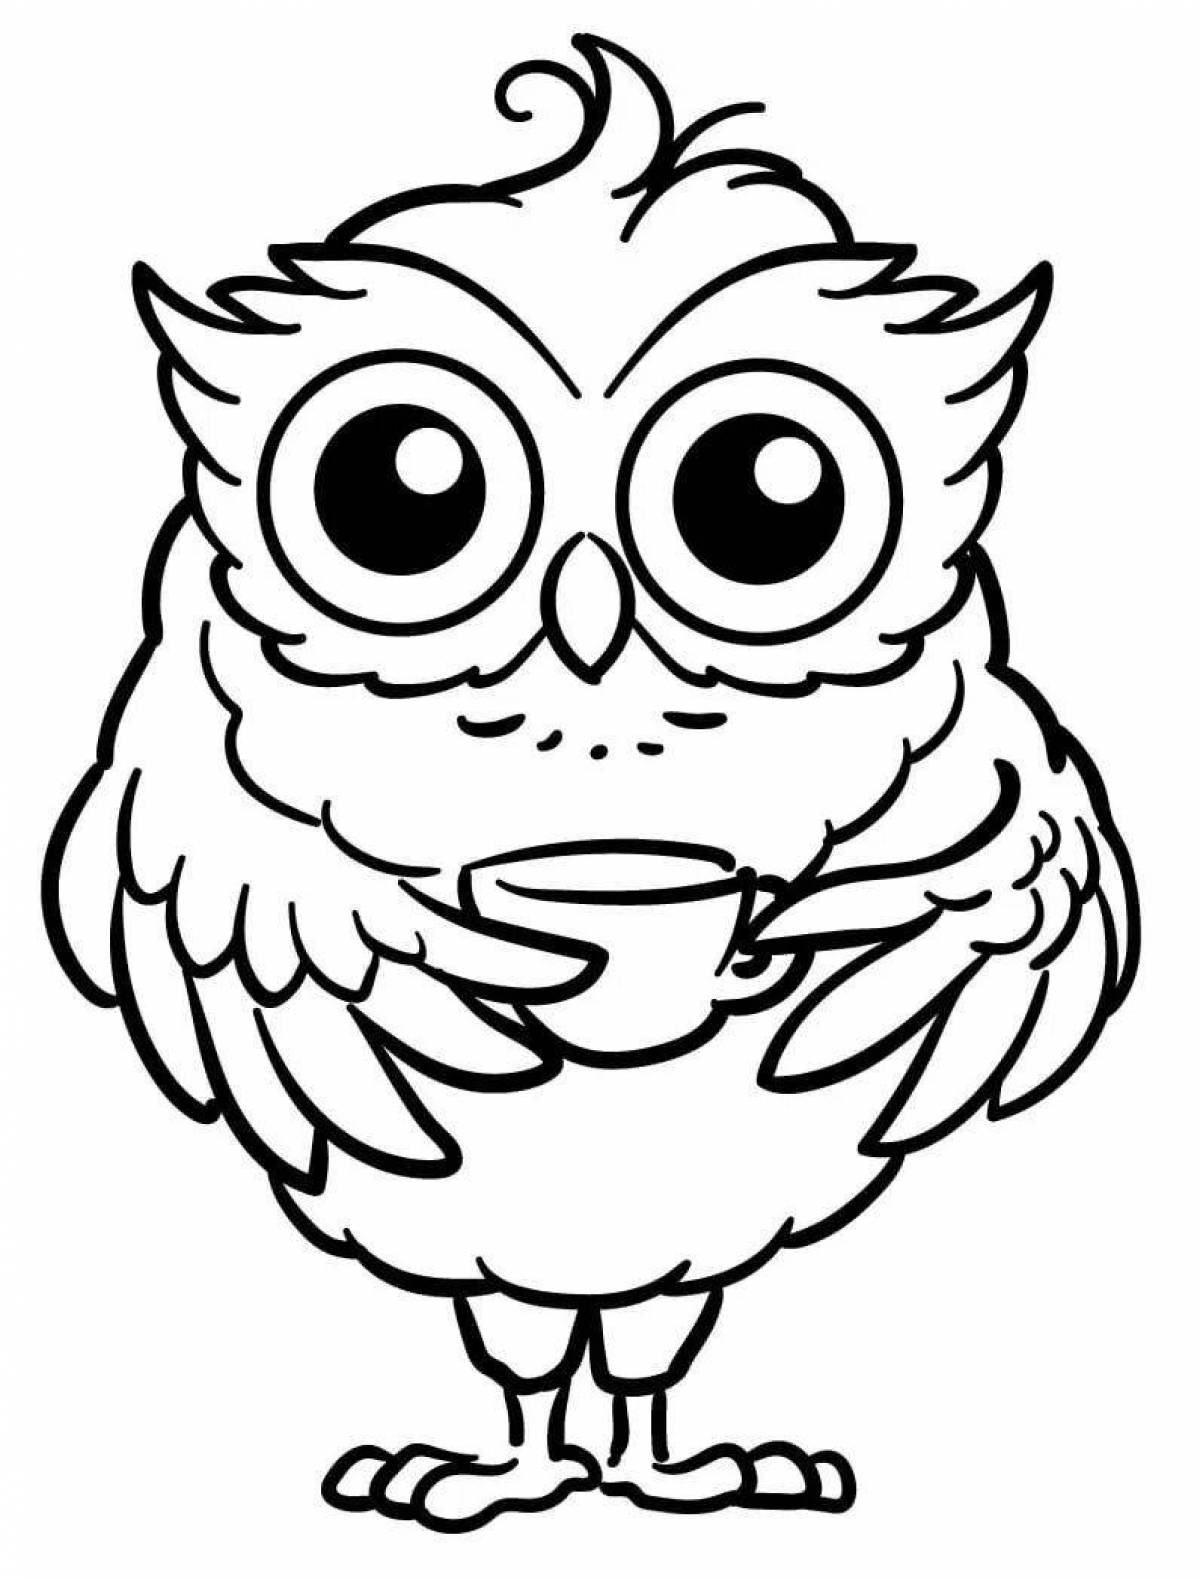 Fun owl coloring book for 6-7 year olds